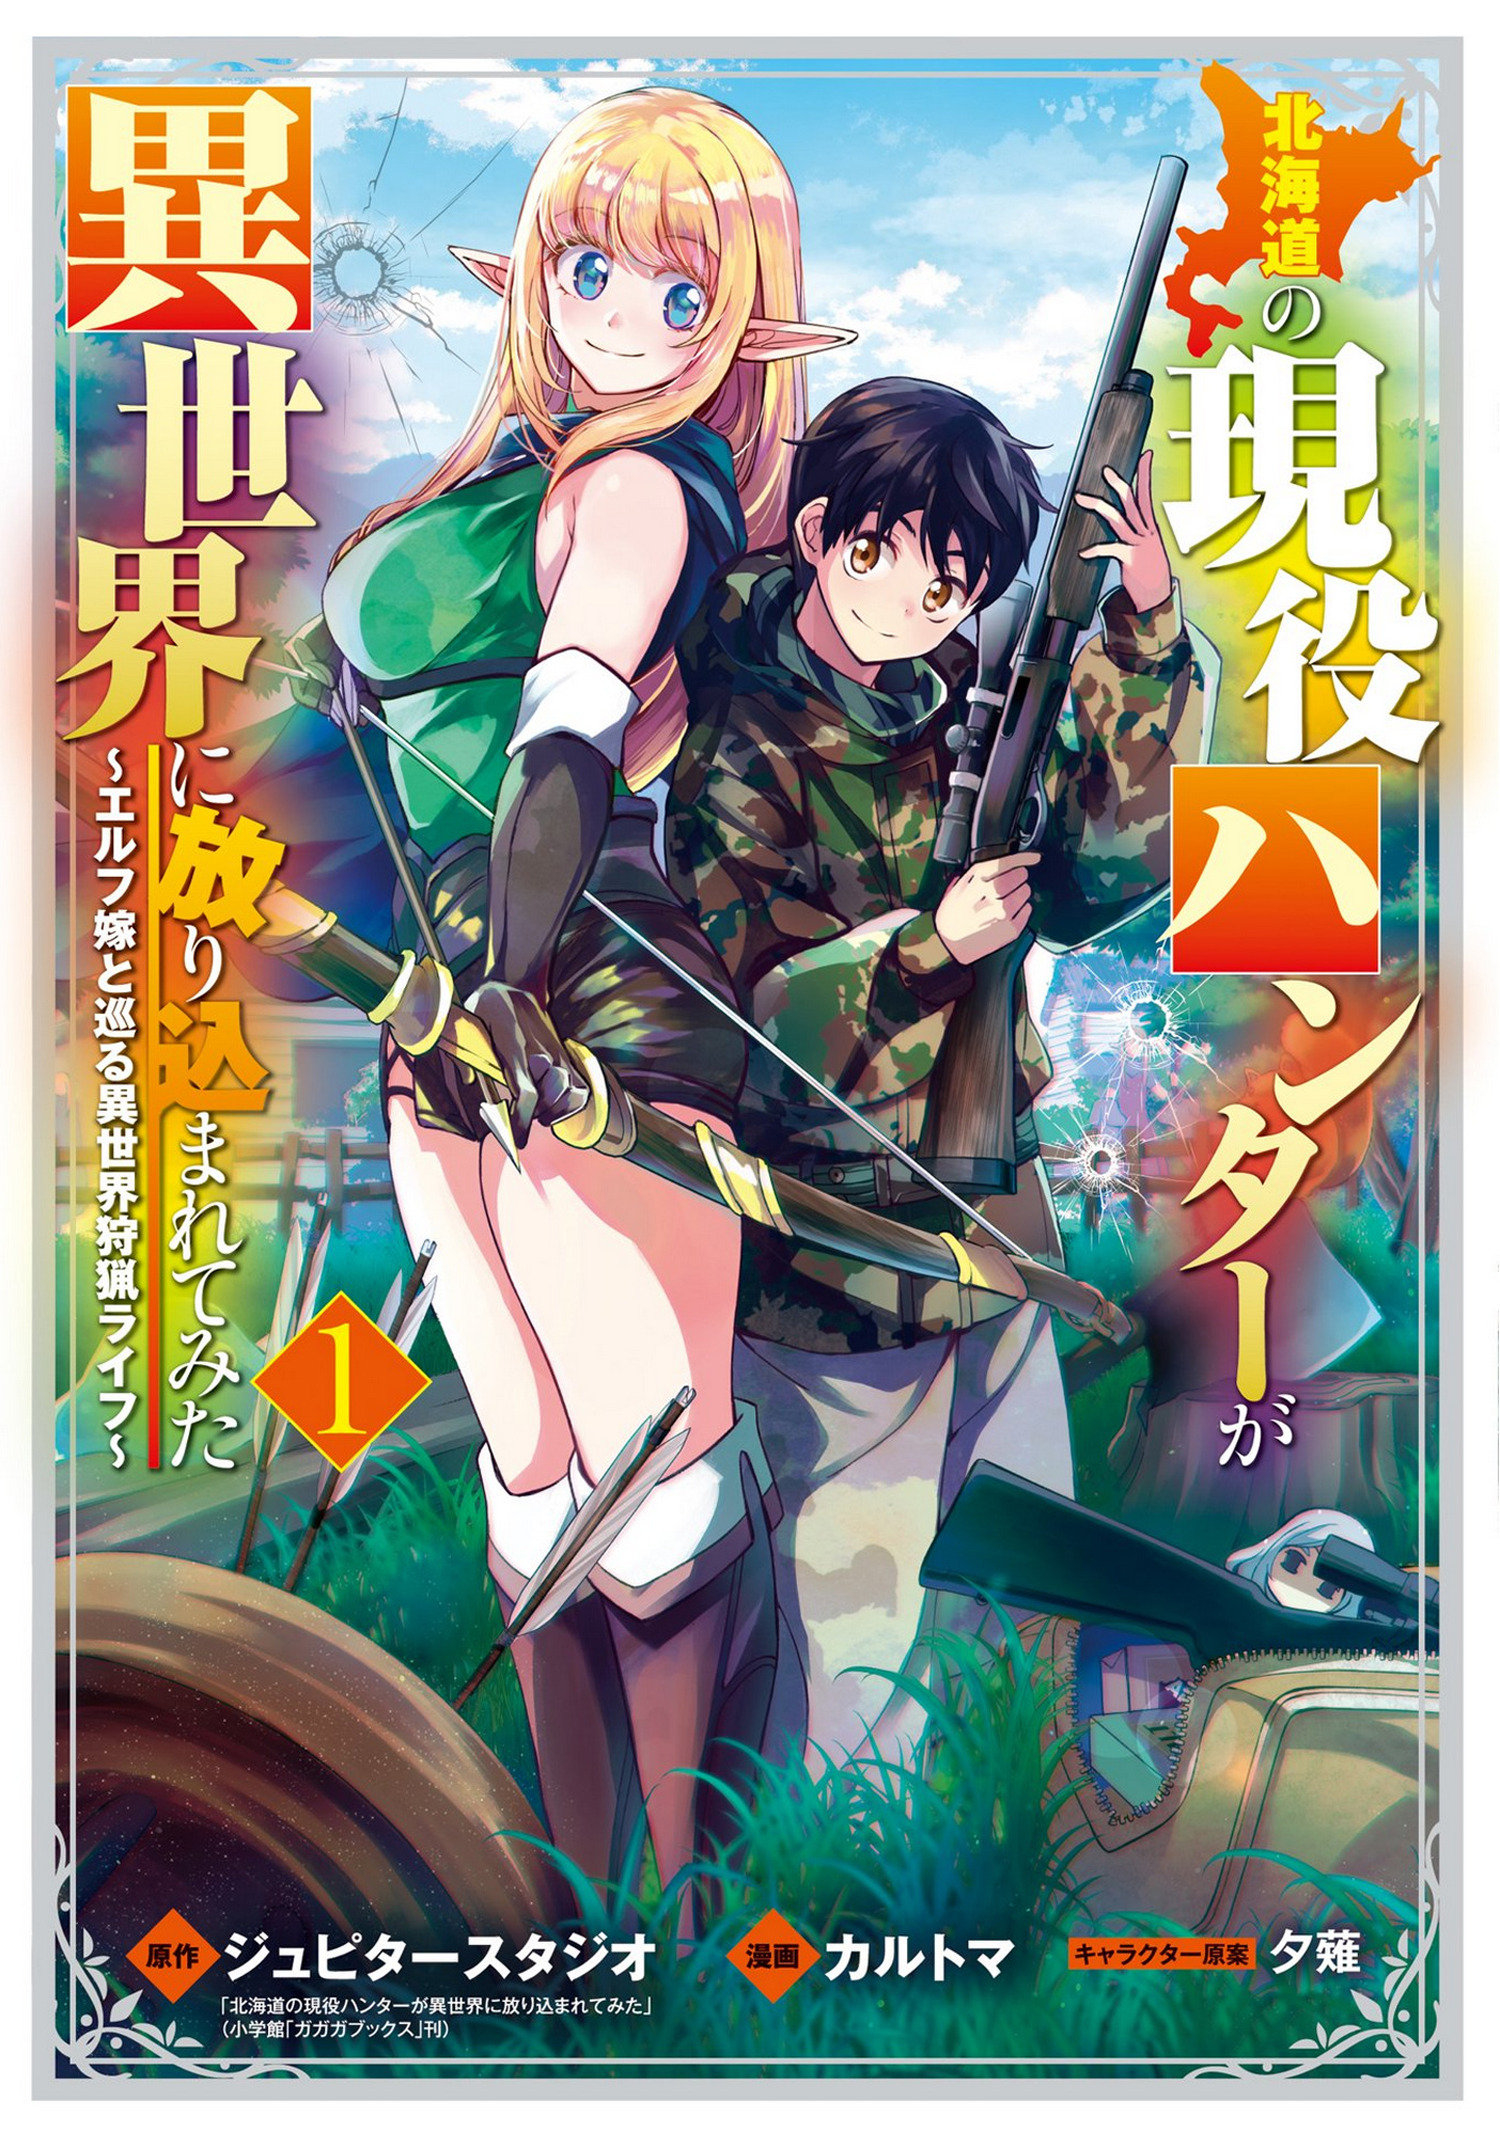 Hunting in Another World with My Elf Wife Manga Volume 1